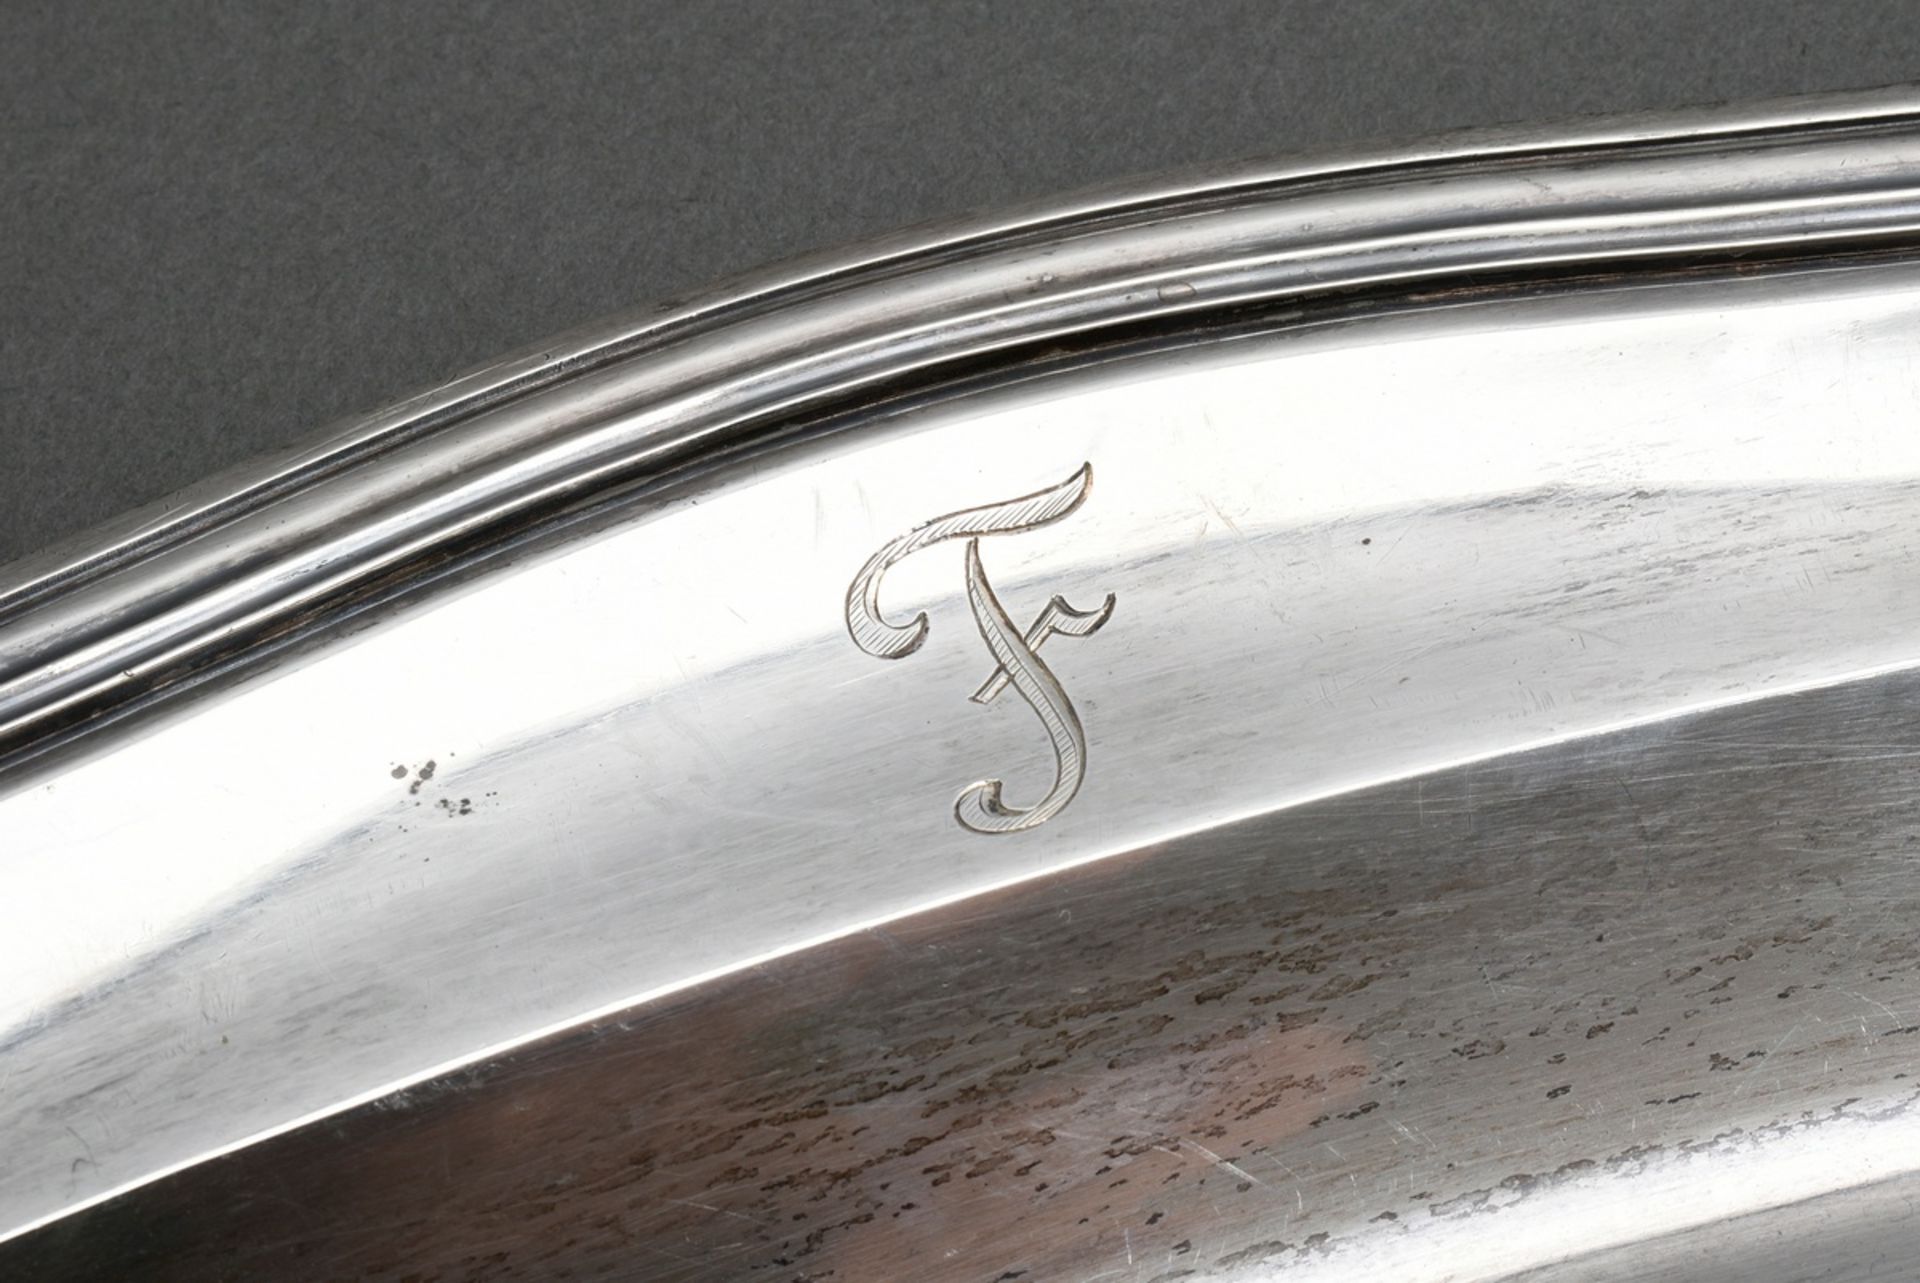 Large oval plate with chippendale rim and monogram "F", MM: Ernst Mehner/Stuttgart, silver 800, 212 - Image 2 of 4